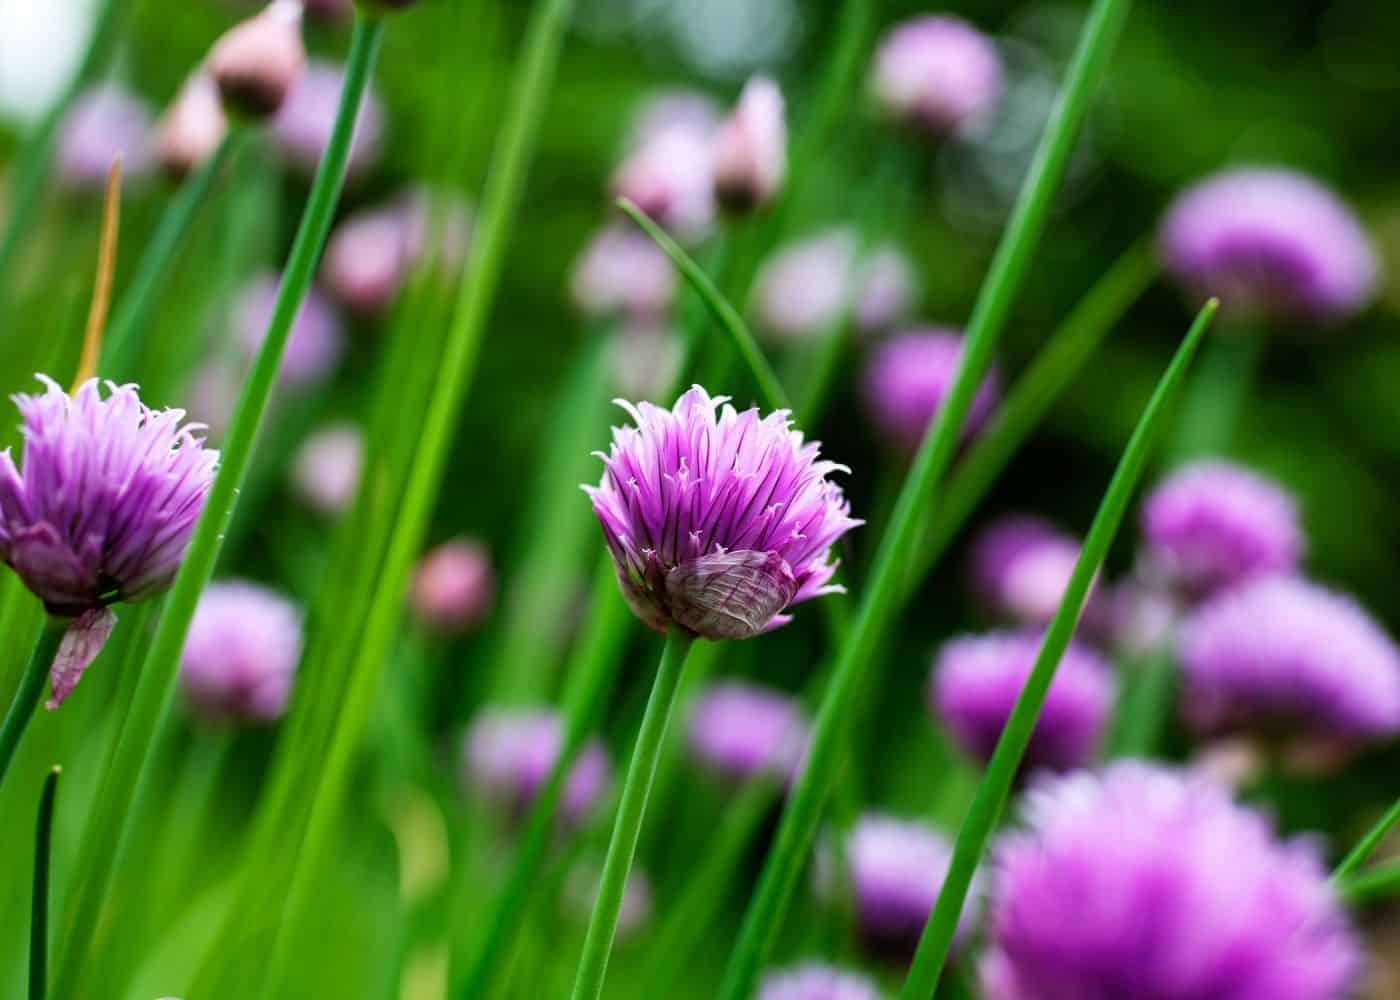 Chives - companion plants for tomatoes